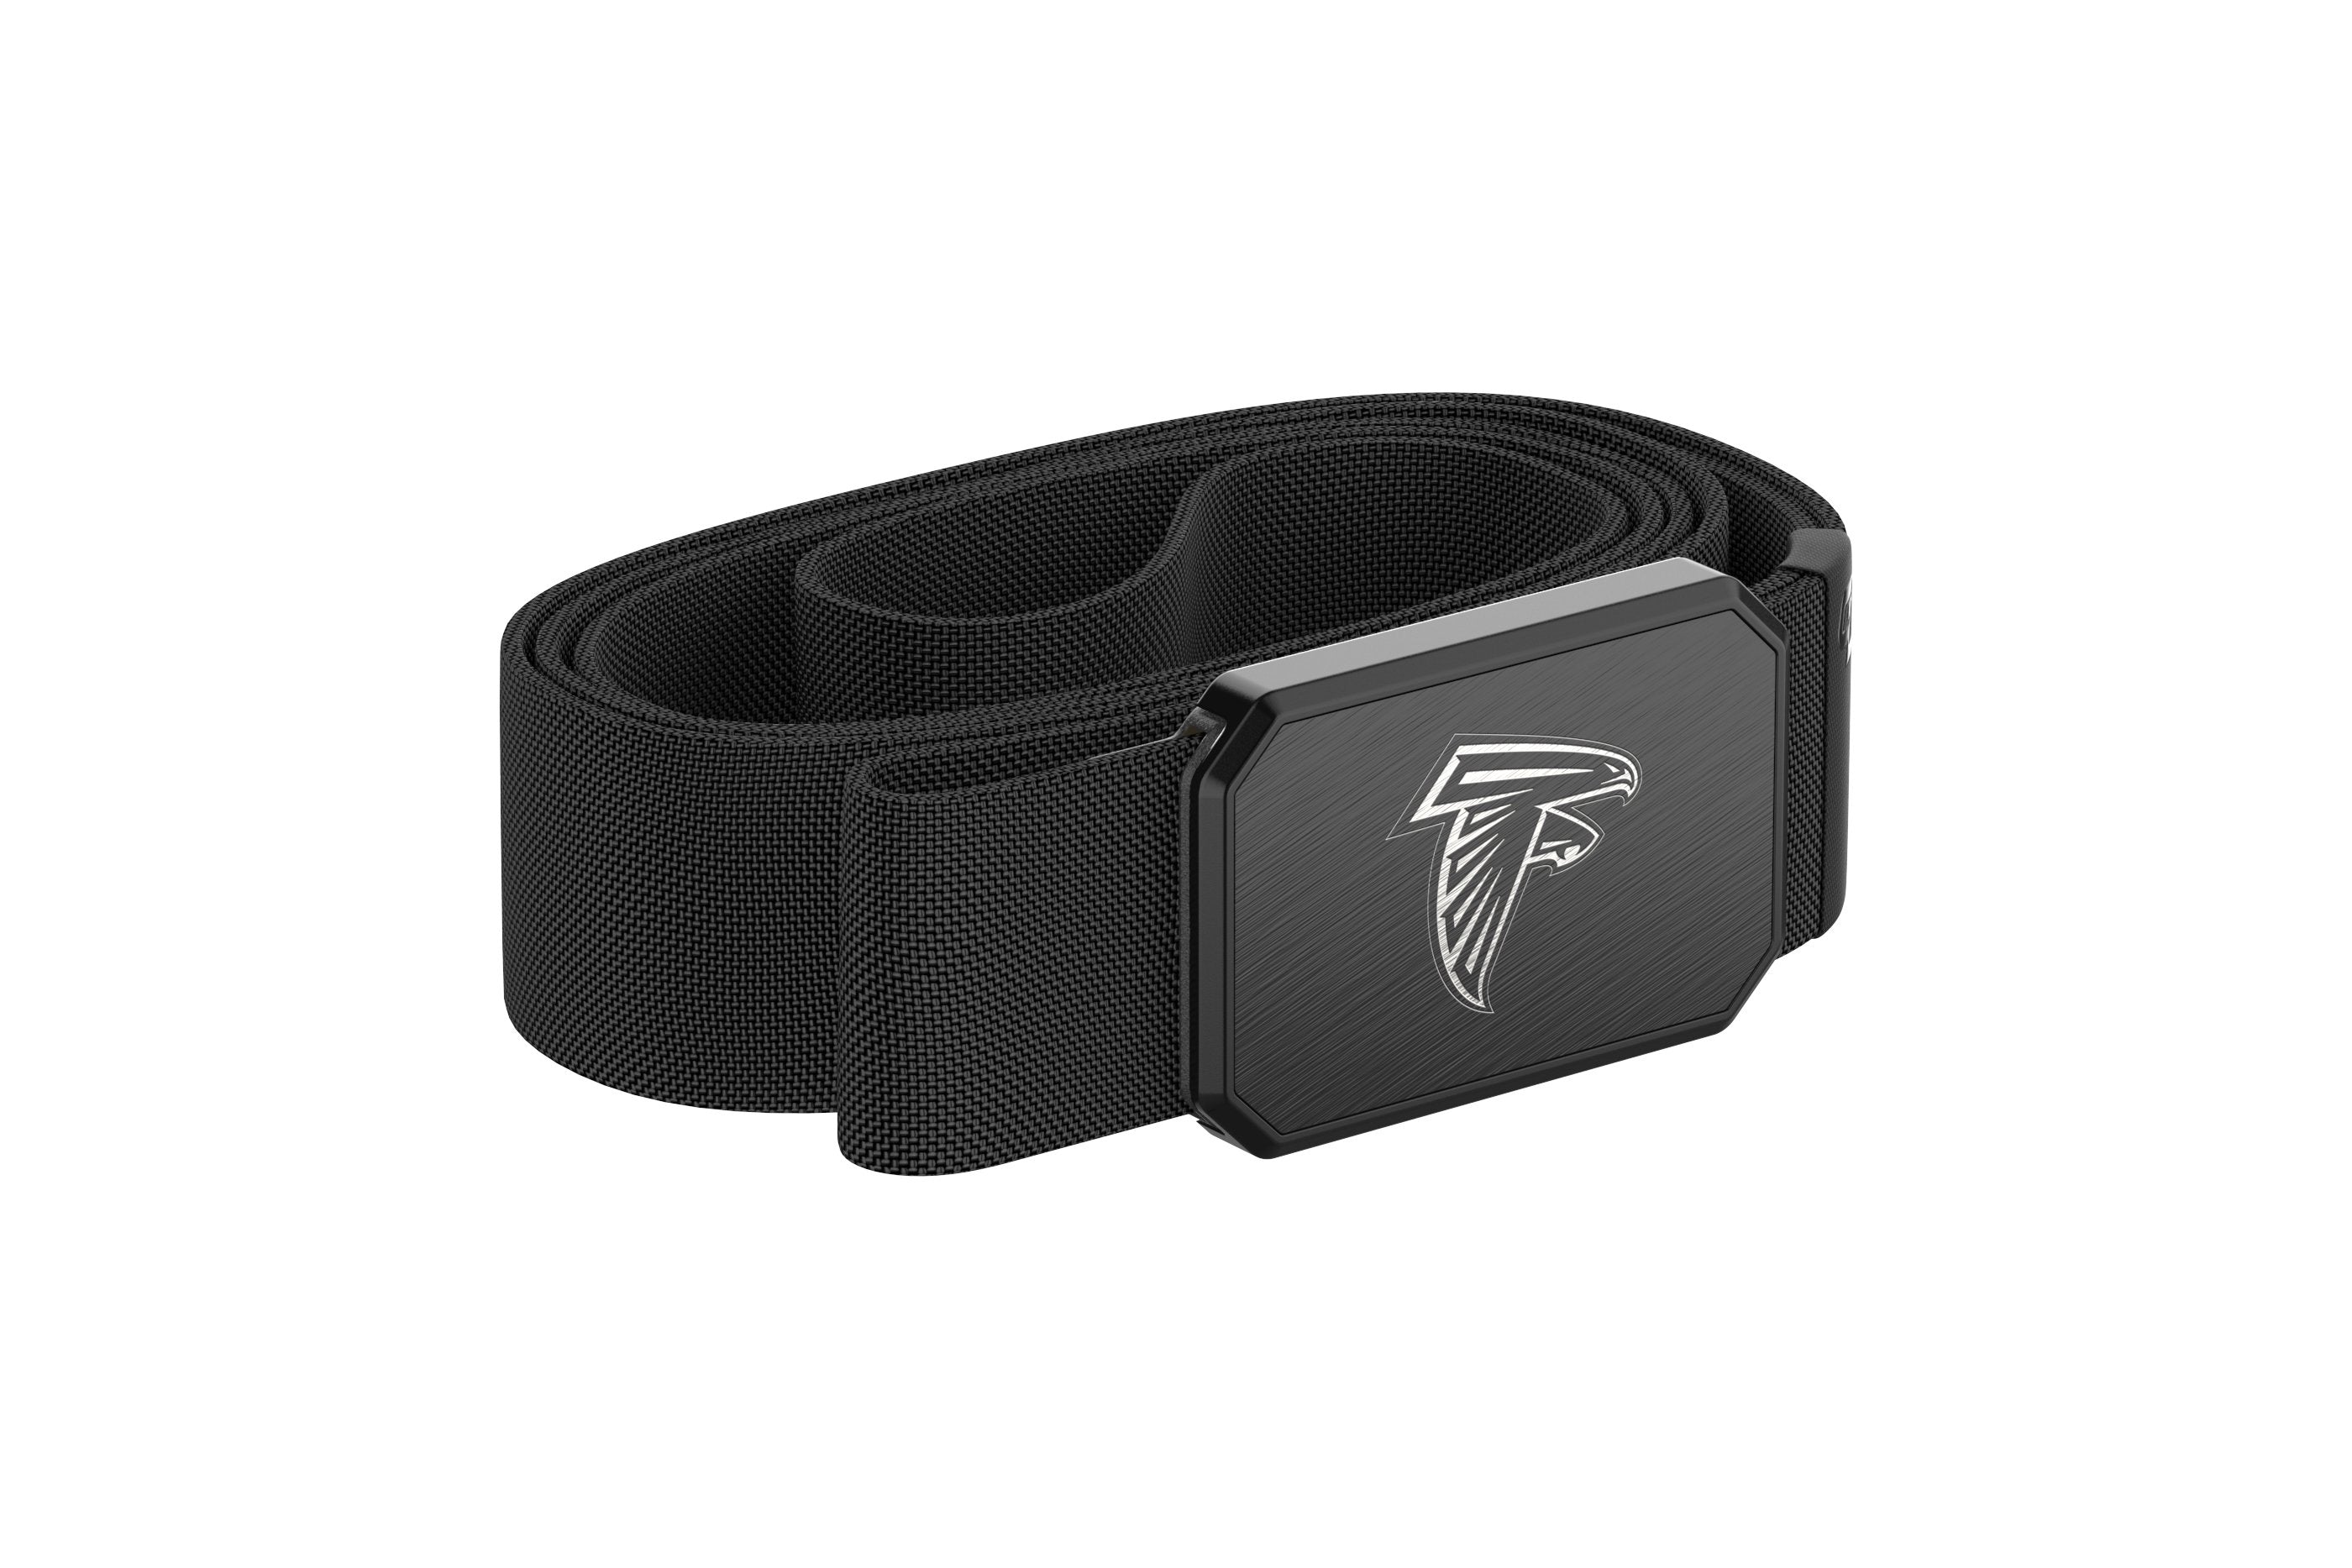 Atlanta Falcons Groove Belt viewed from side